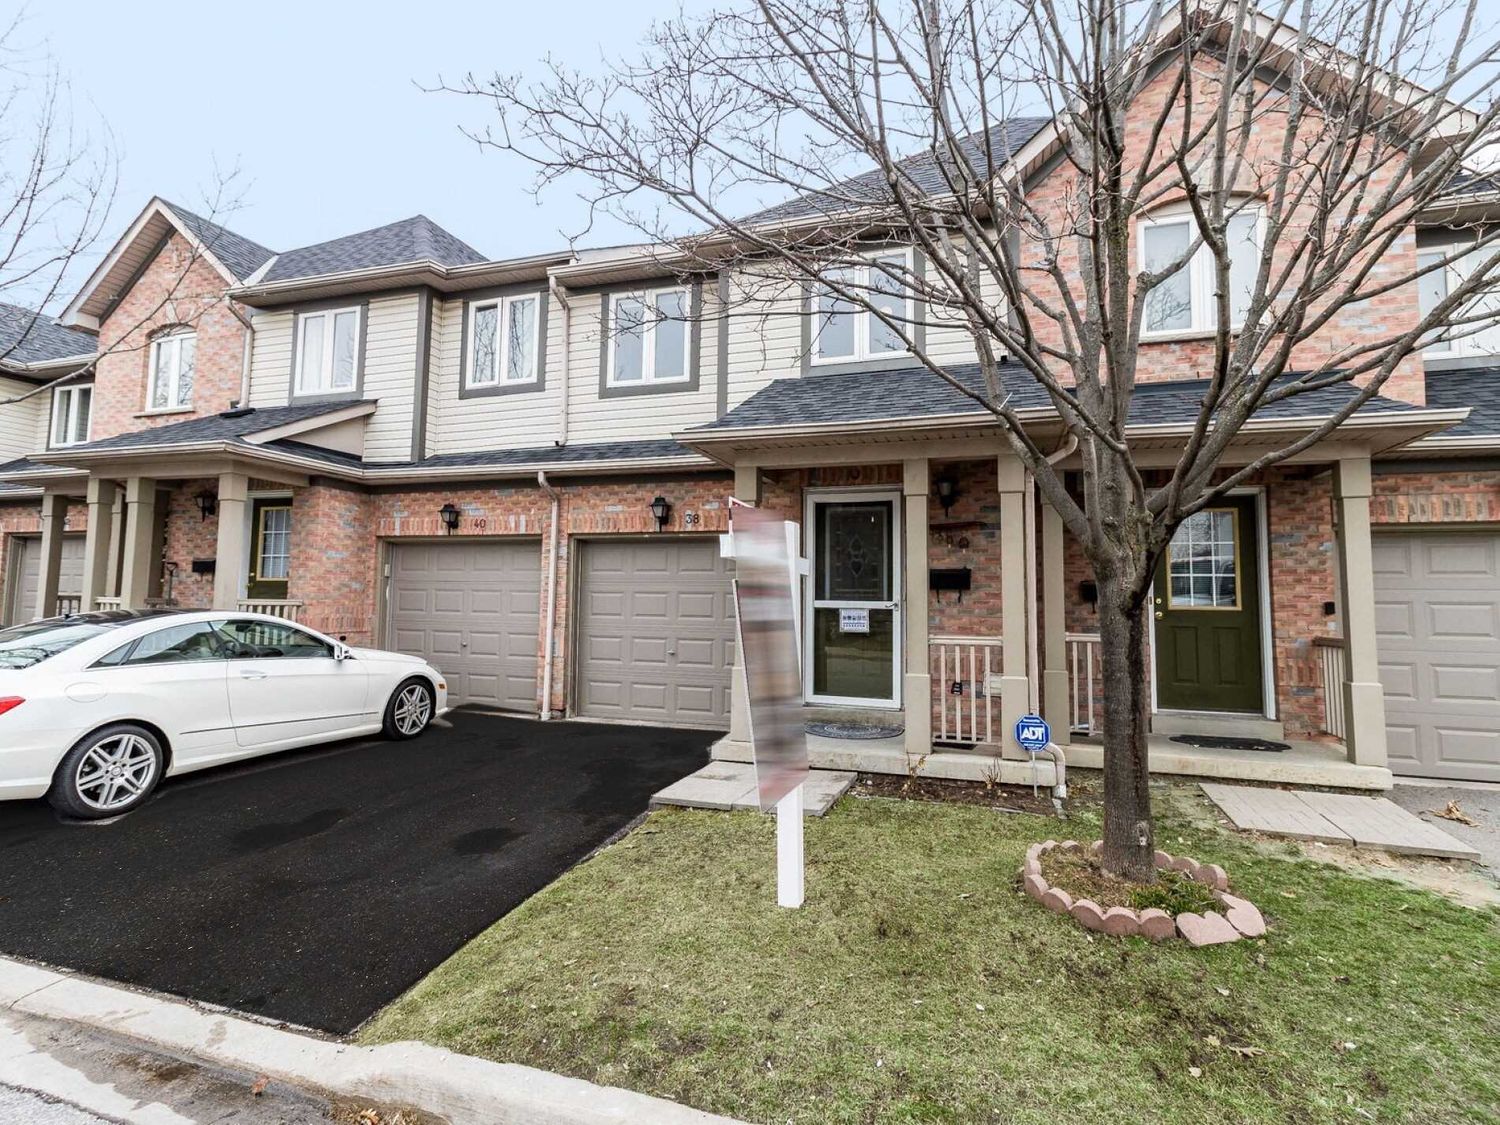 5255 Guildwood Way. 5255 Guildwood Way Townhomes is located in  Mississauga, Toronto - image #2 of 2